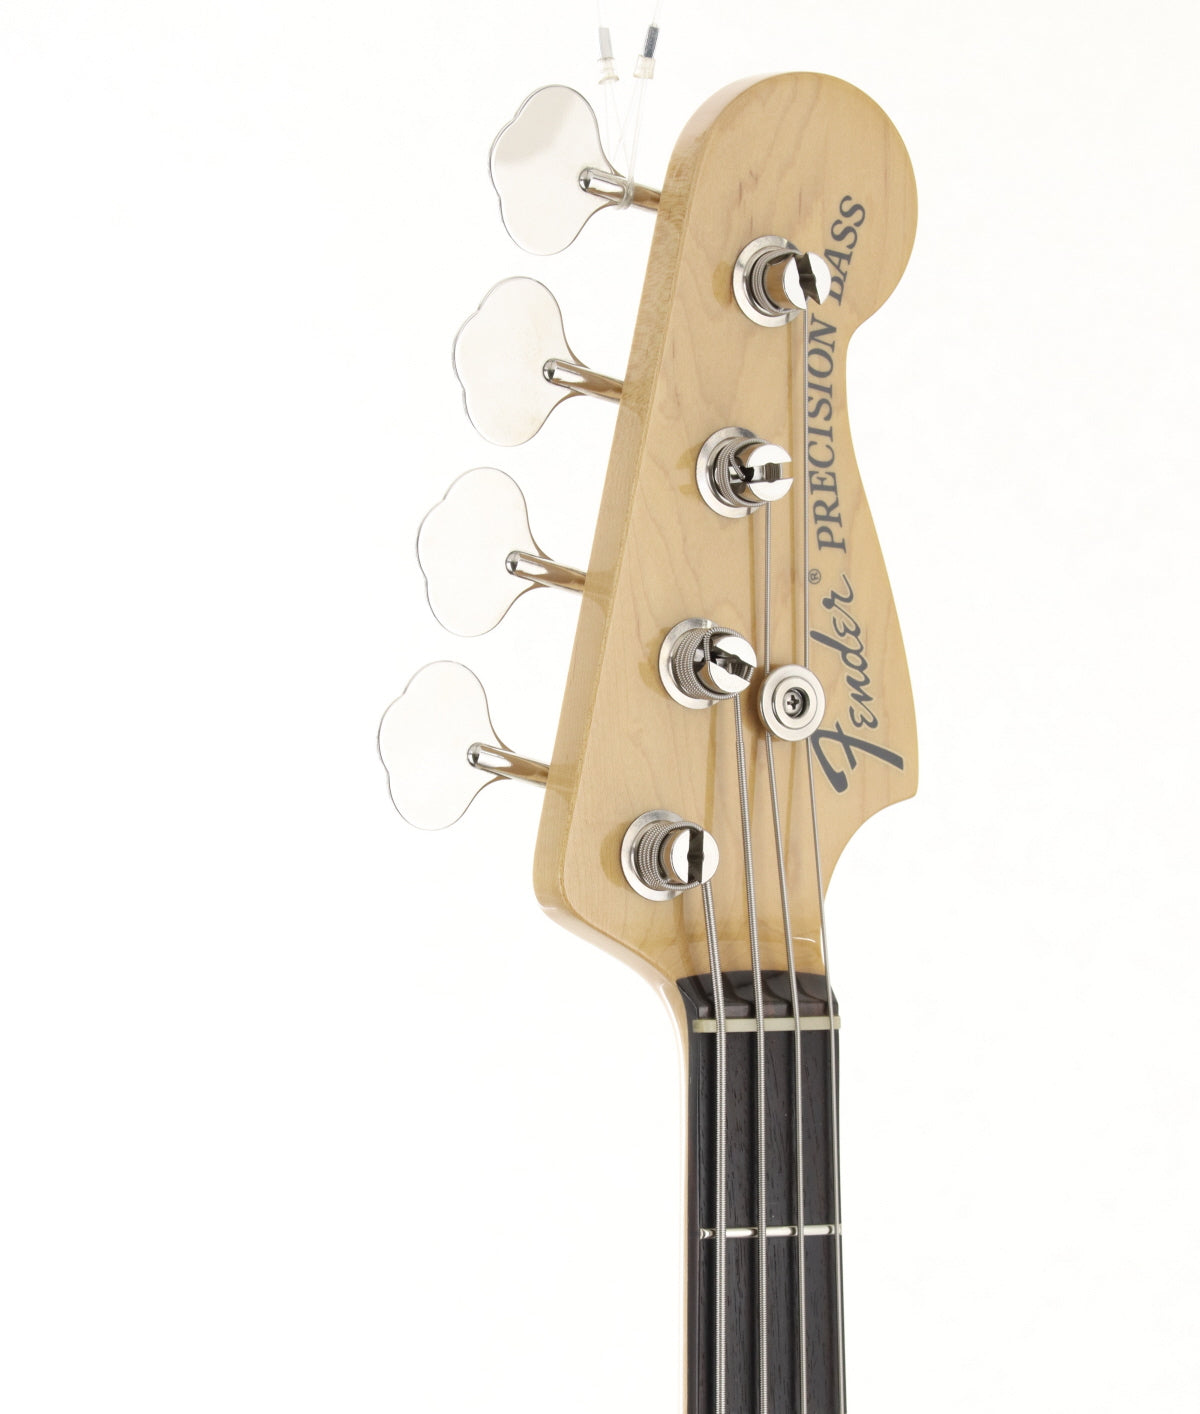 [SN JD17034942] USED Fender Made in Japan / Traditional 70s Precision Bass Arctic White [08]